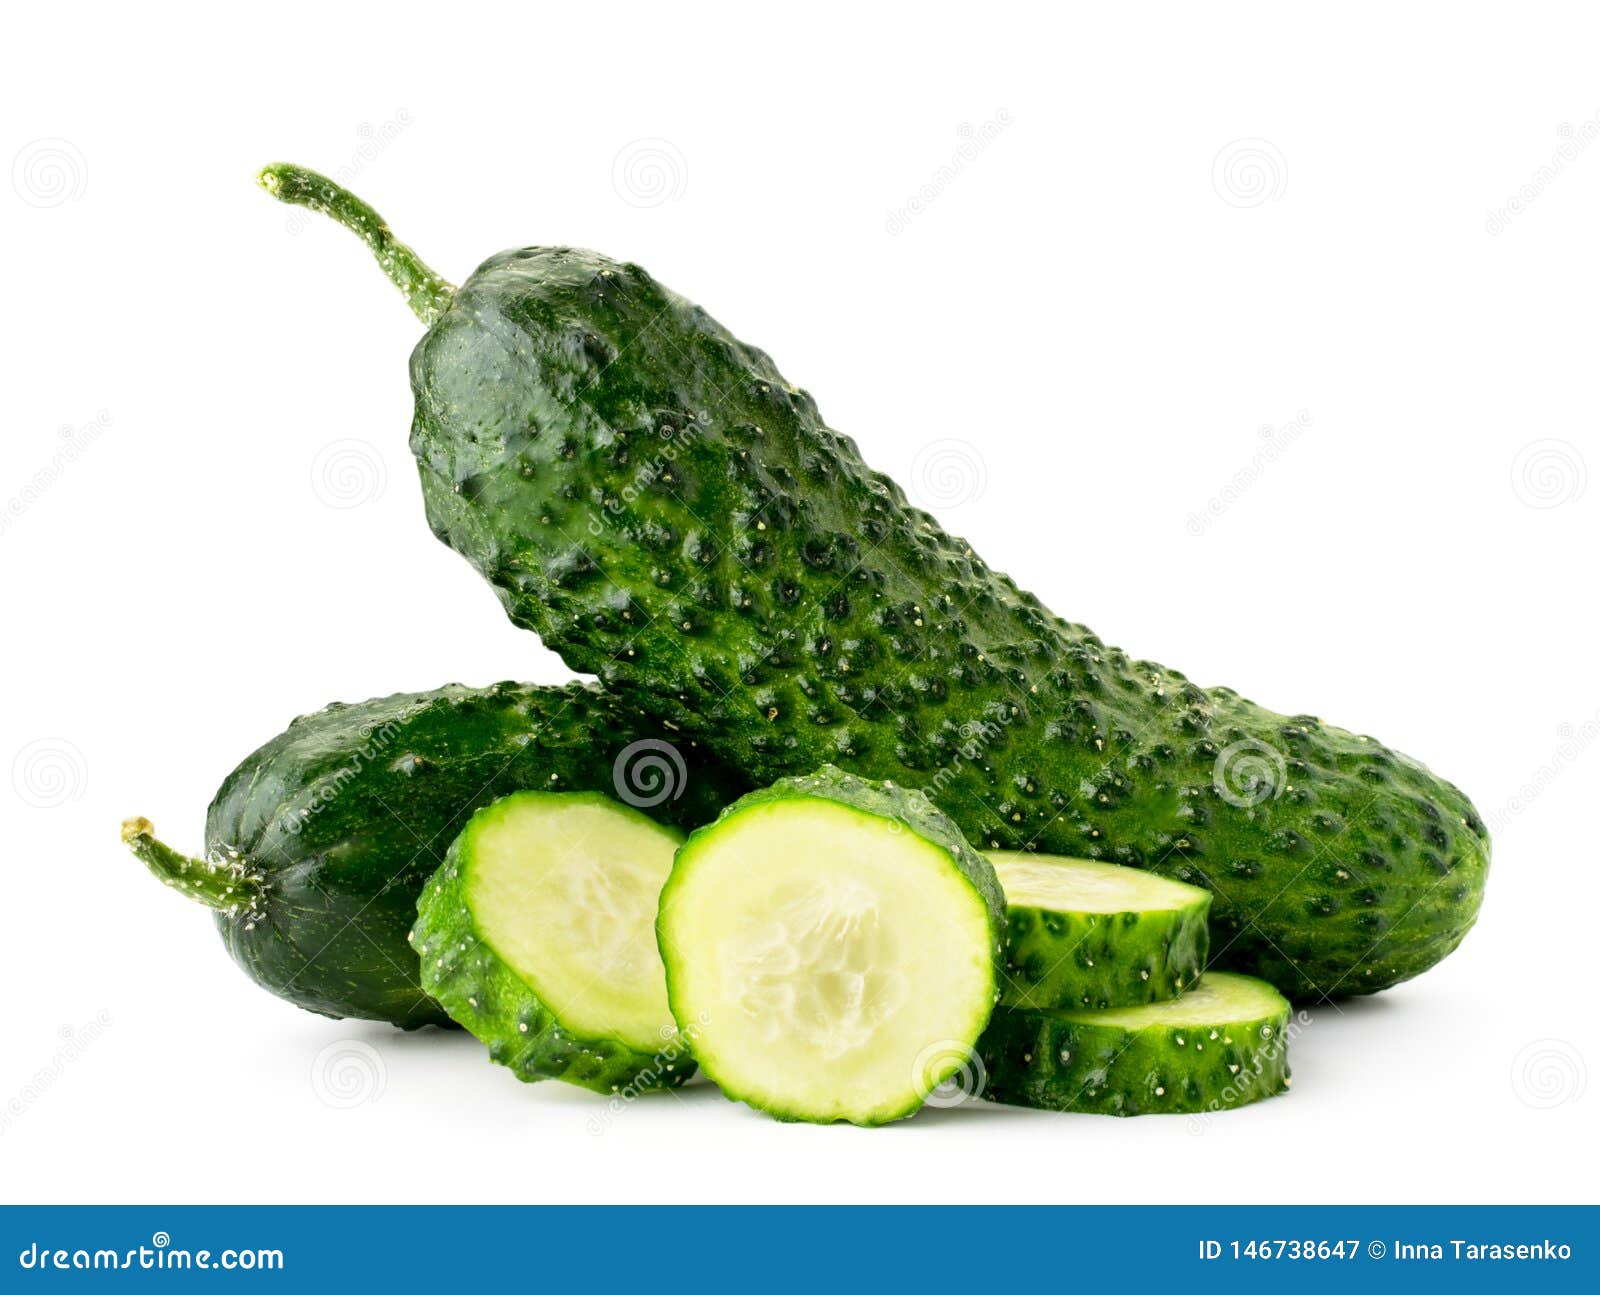 ripe cucumbers and slices close-up on a white background. .